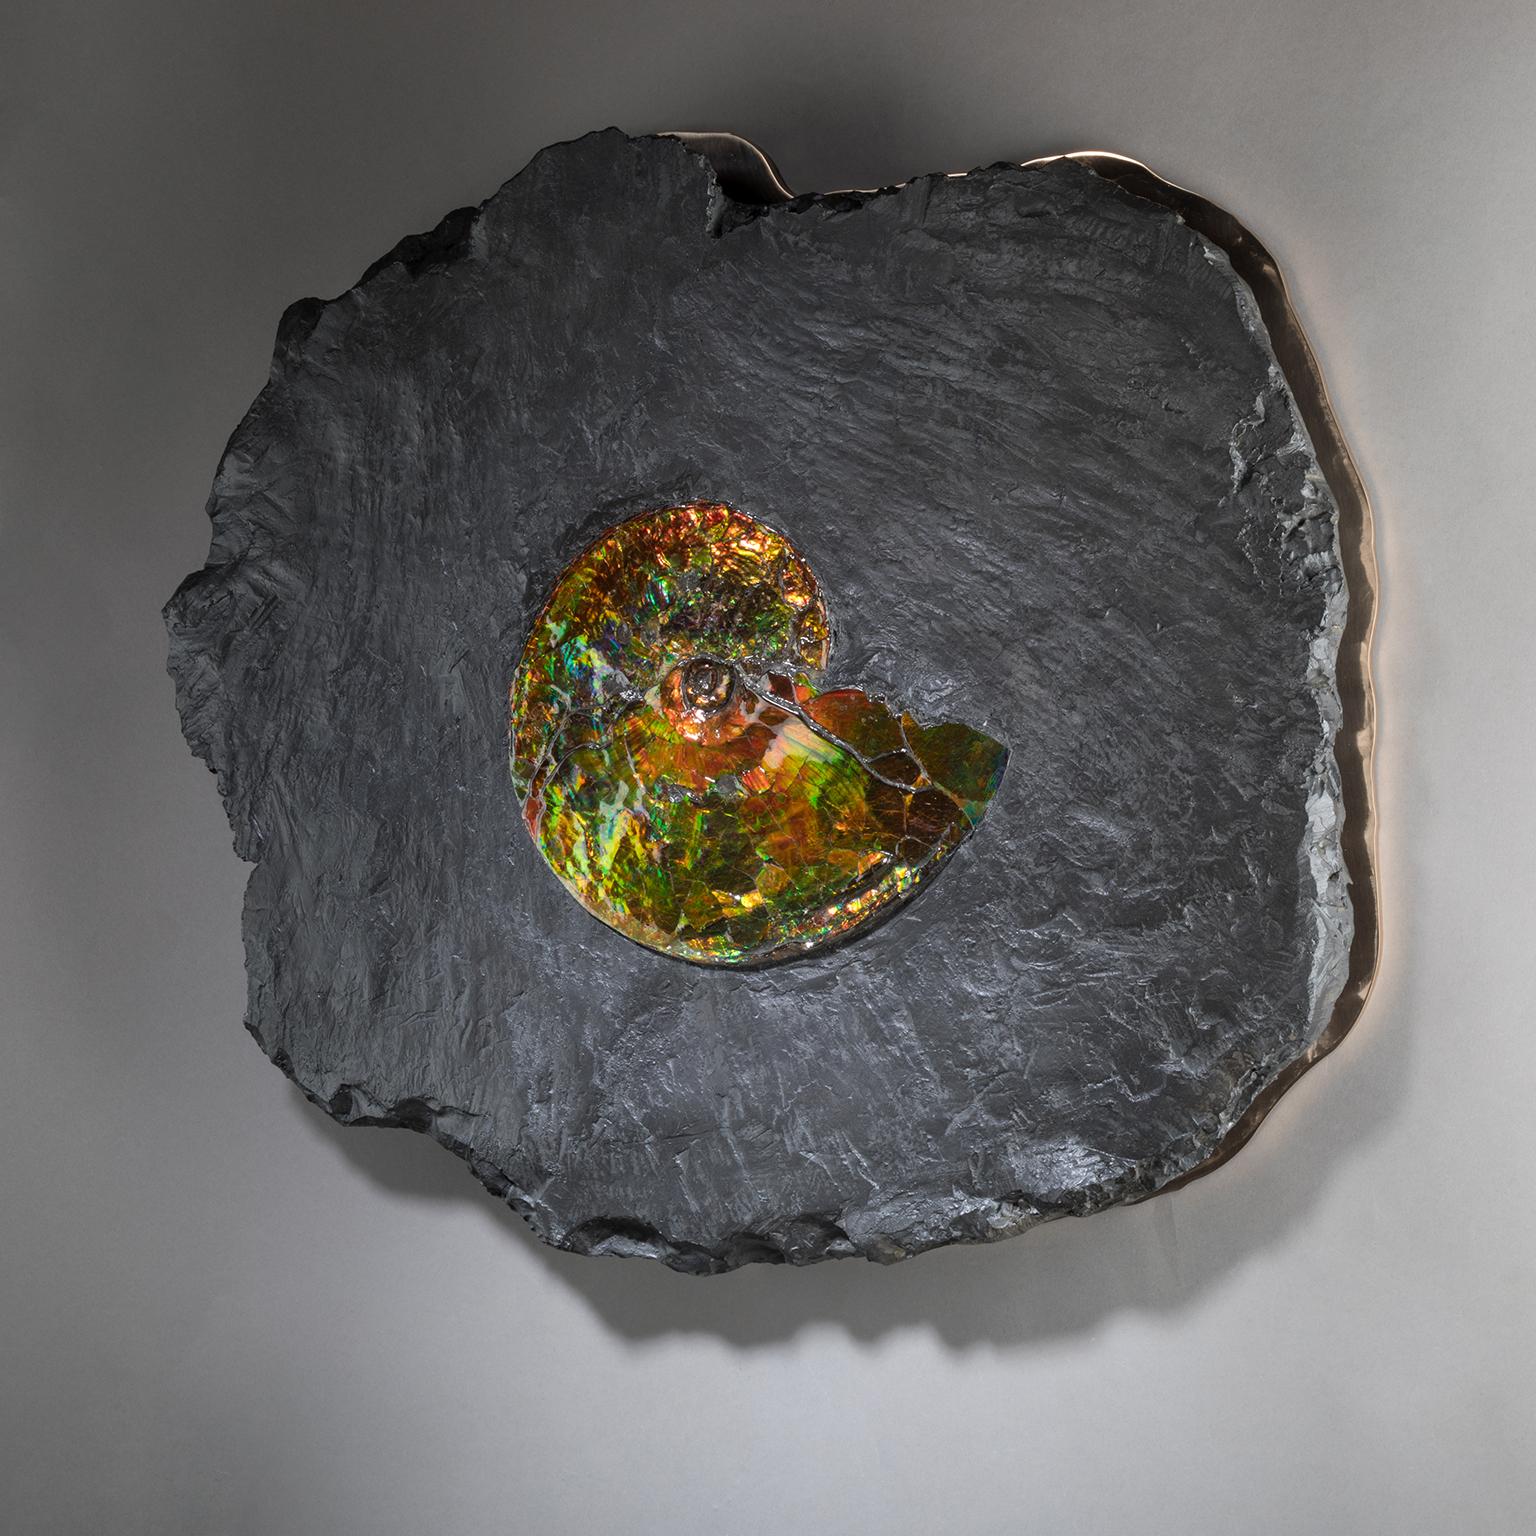 AMMONITE ON BRONZE

The story of Studio Greytak’s Ammonite on Bronze begins 71 million years ago in a vast, tropical inland sea on the eastern border of today’s Rocky Mountains. The exotic species that shared the warm waters, marine reptiles,